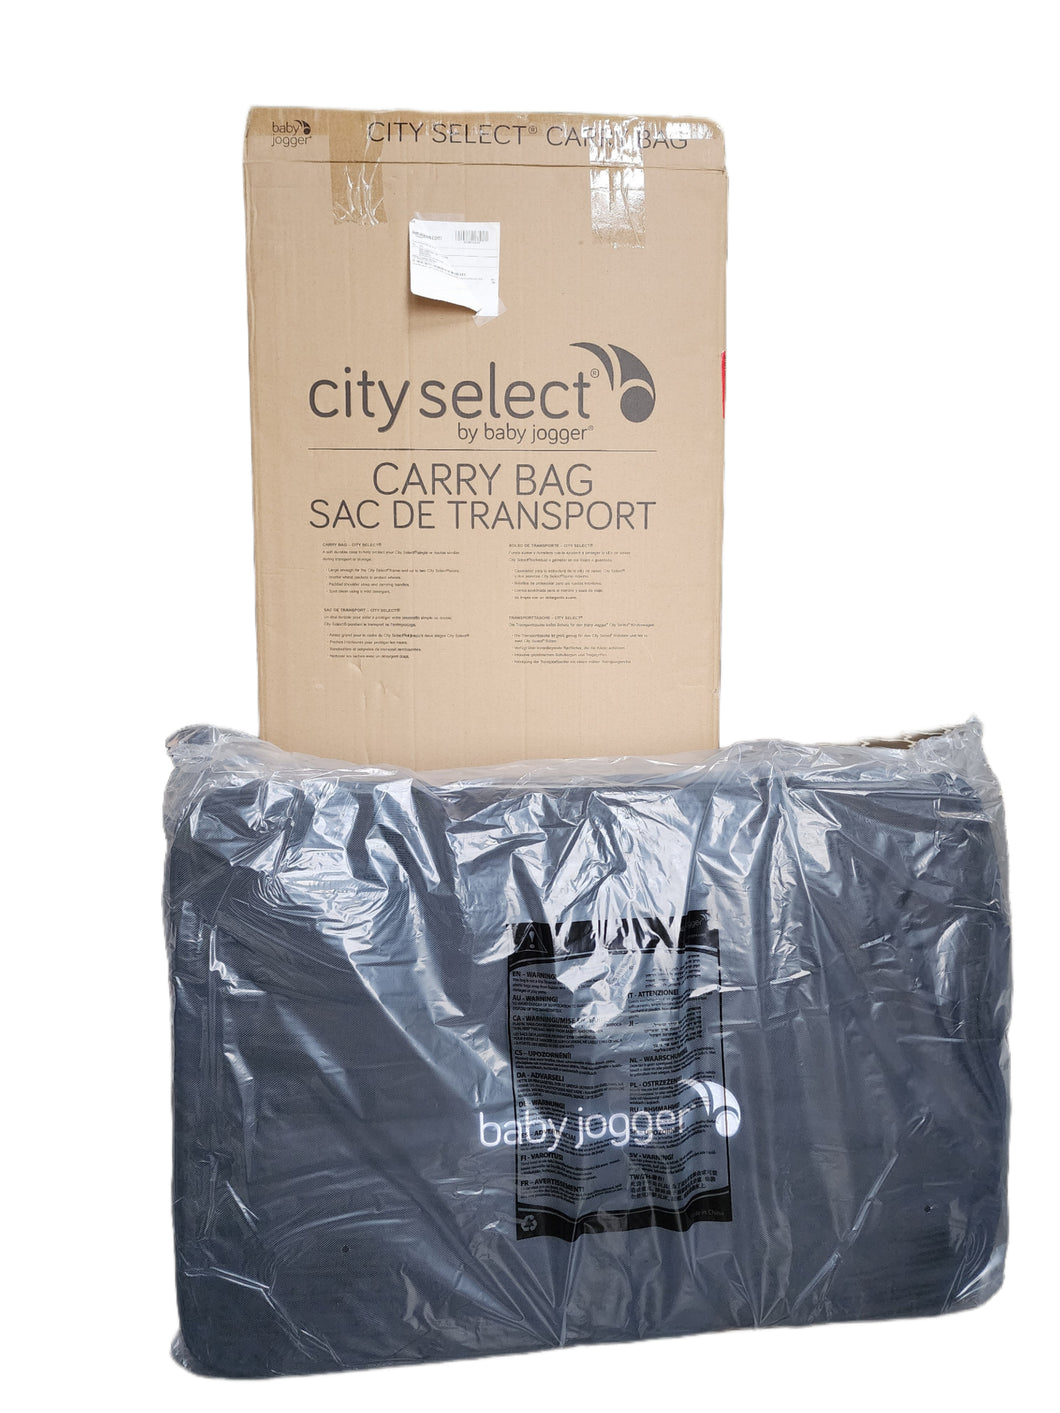 City Select stroller carry bag NWT